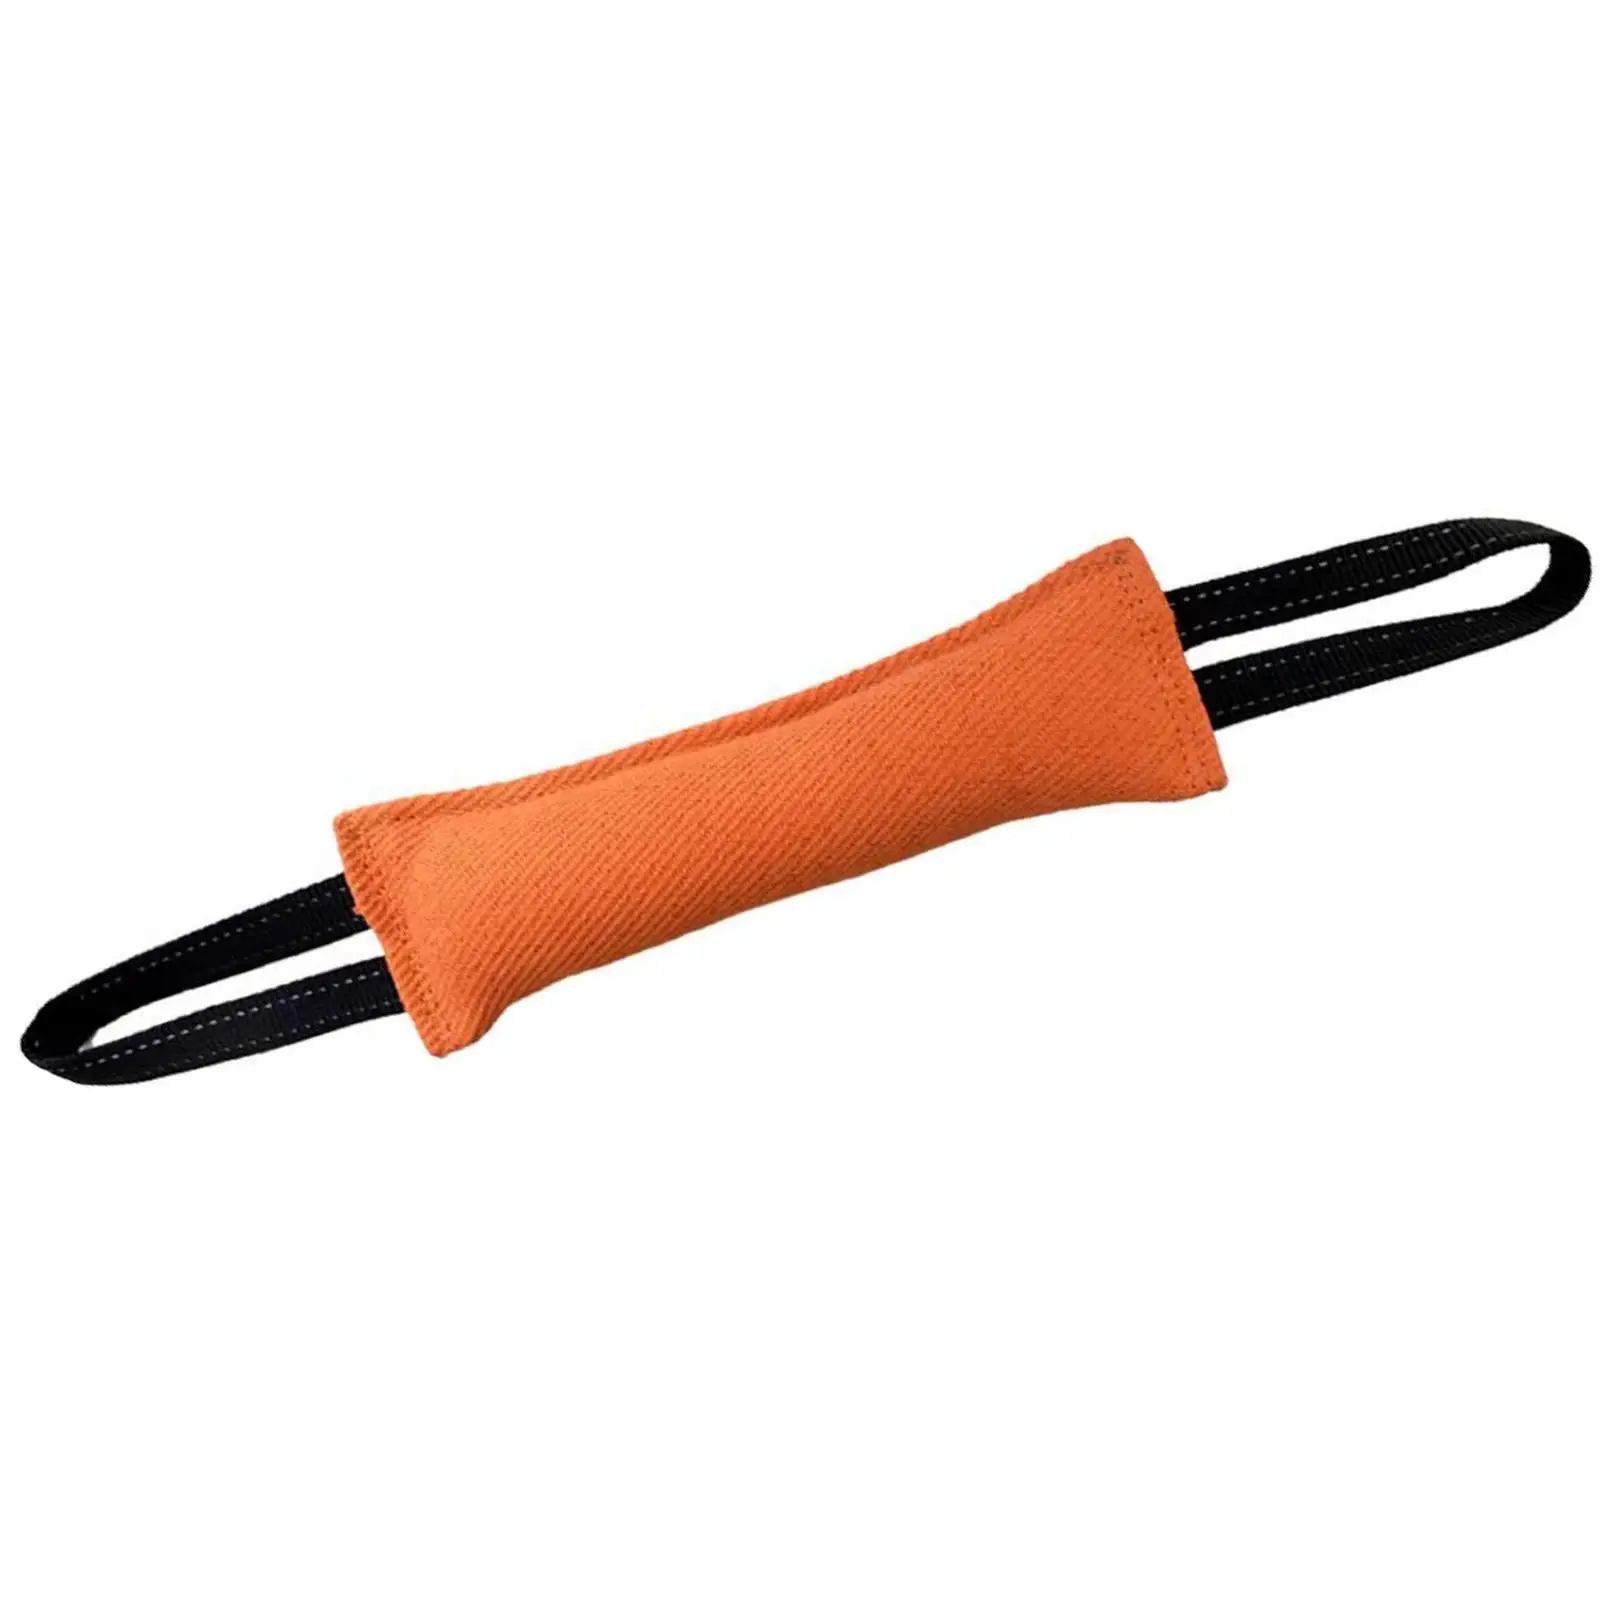 Dog Bite Tug Toy 2 Handles Molar Biting Resistant Bite Sleeve Stick for Puppy Pitbull Aggressive Chewers Outdoor Tug of War